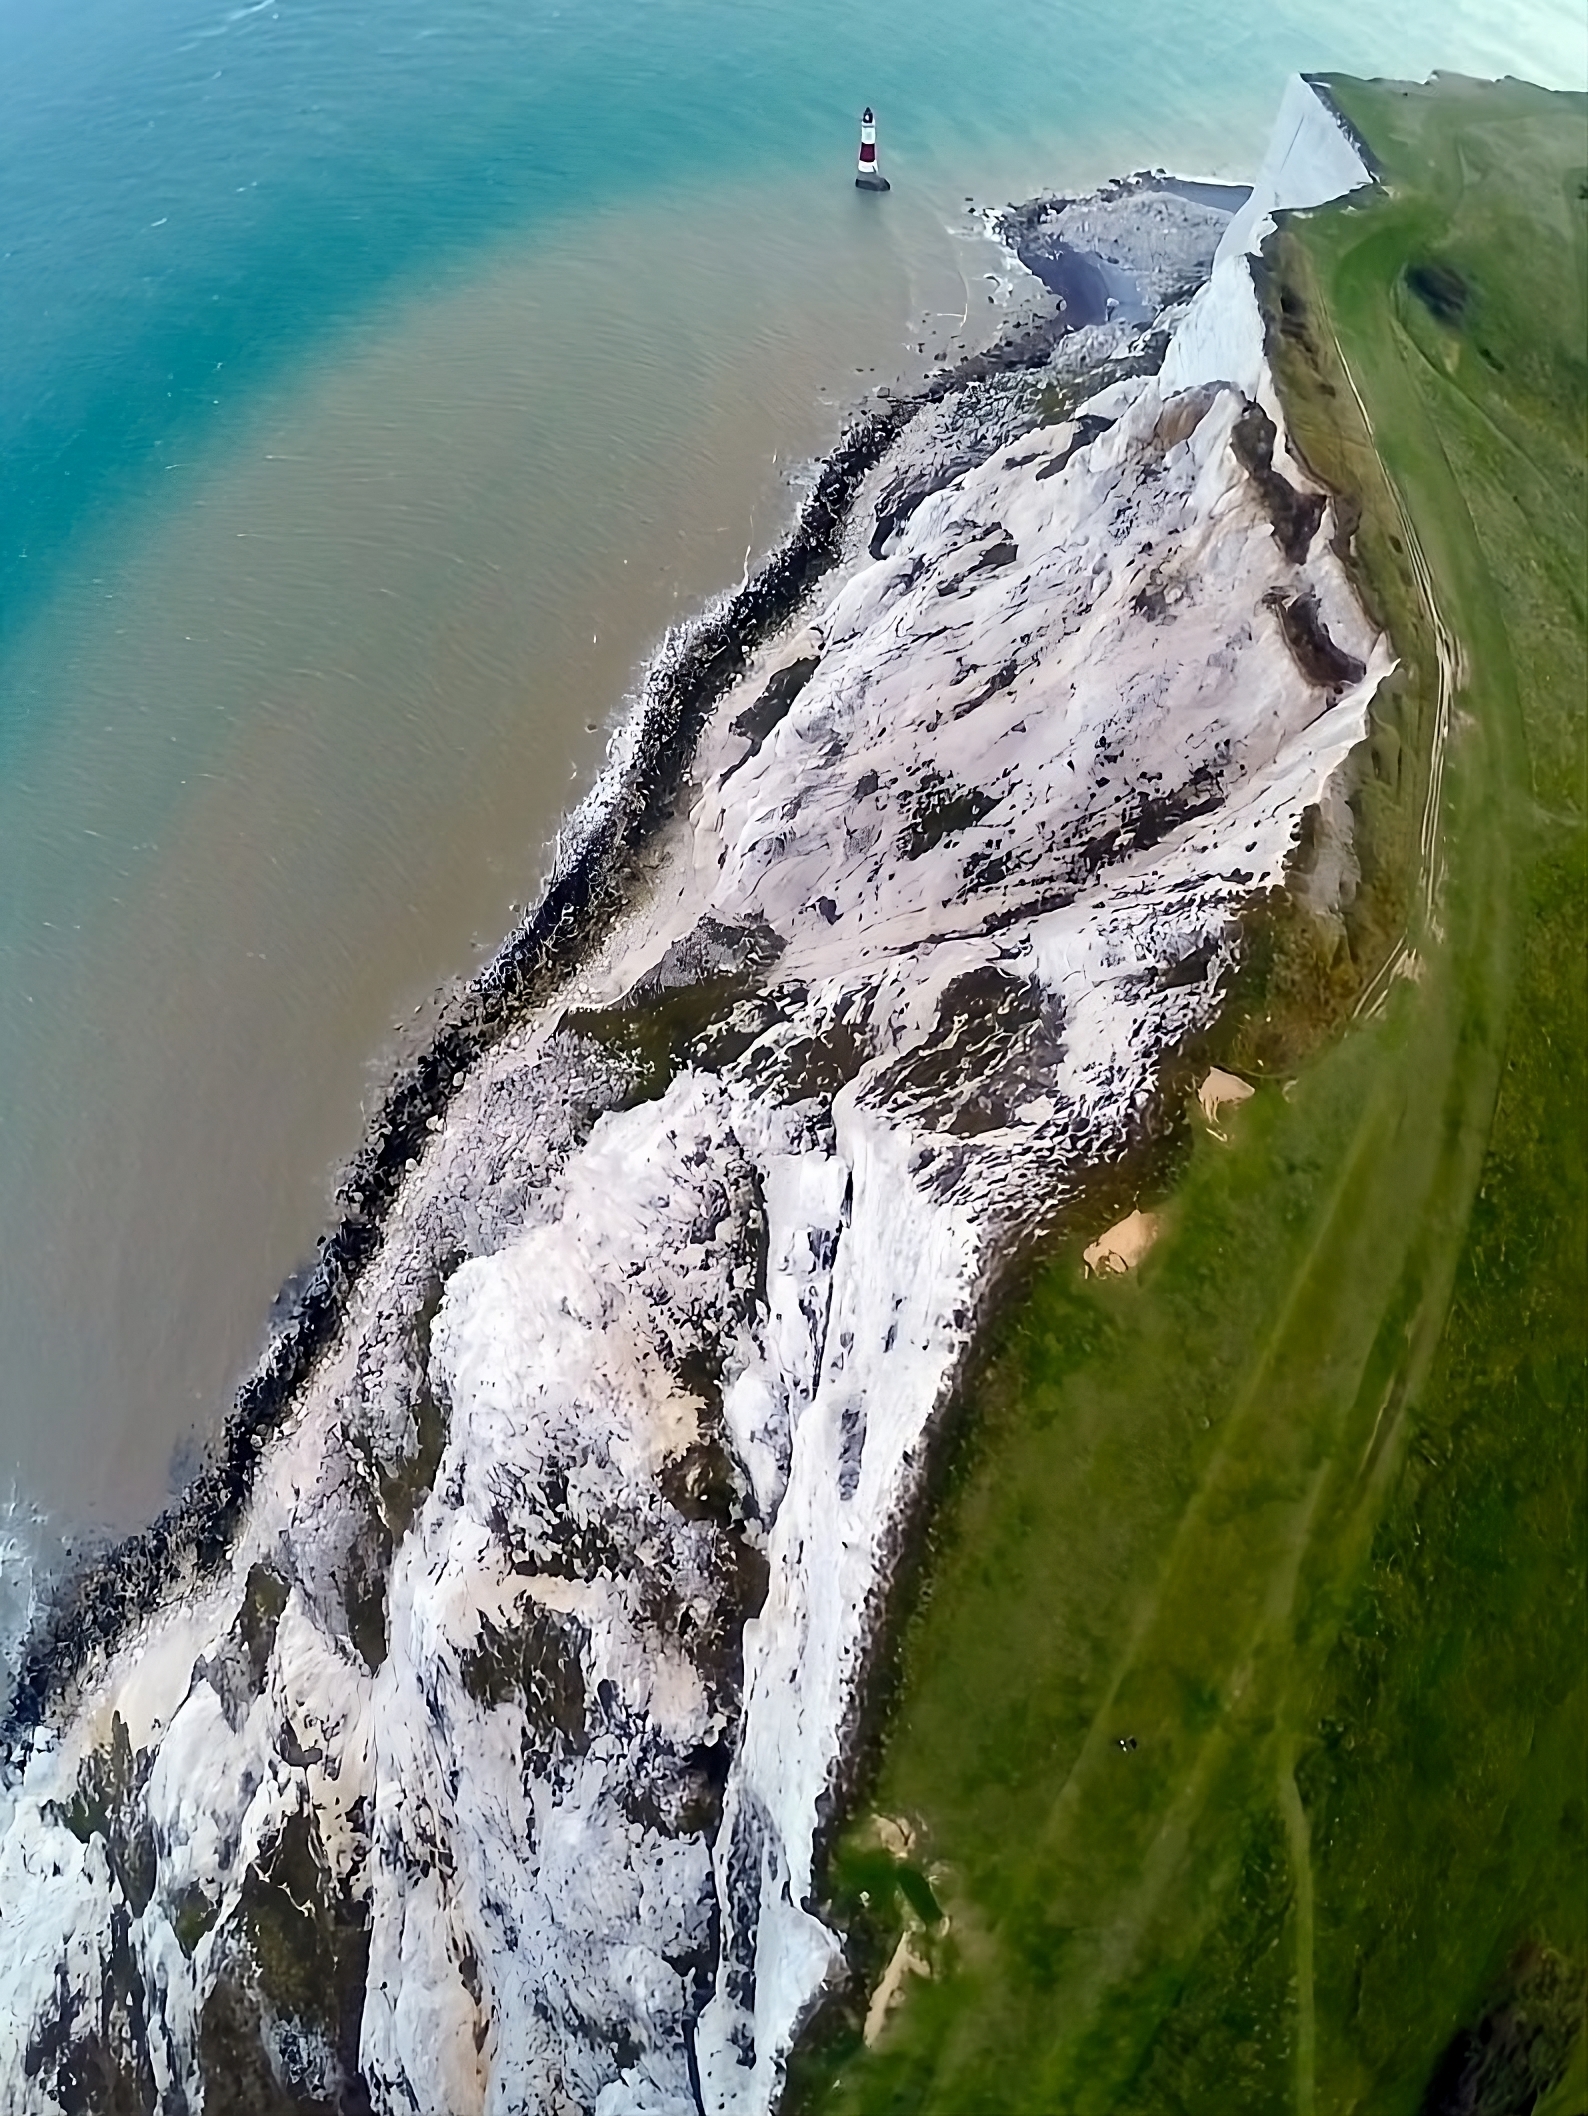 Beachy Head Lighthouse Eastbourne from a above